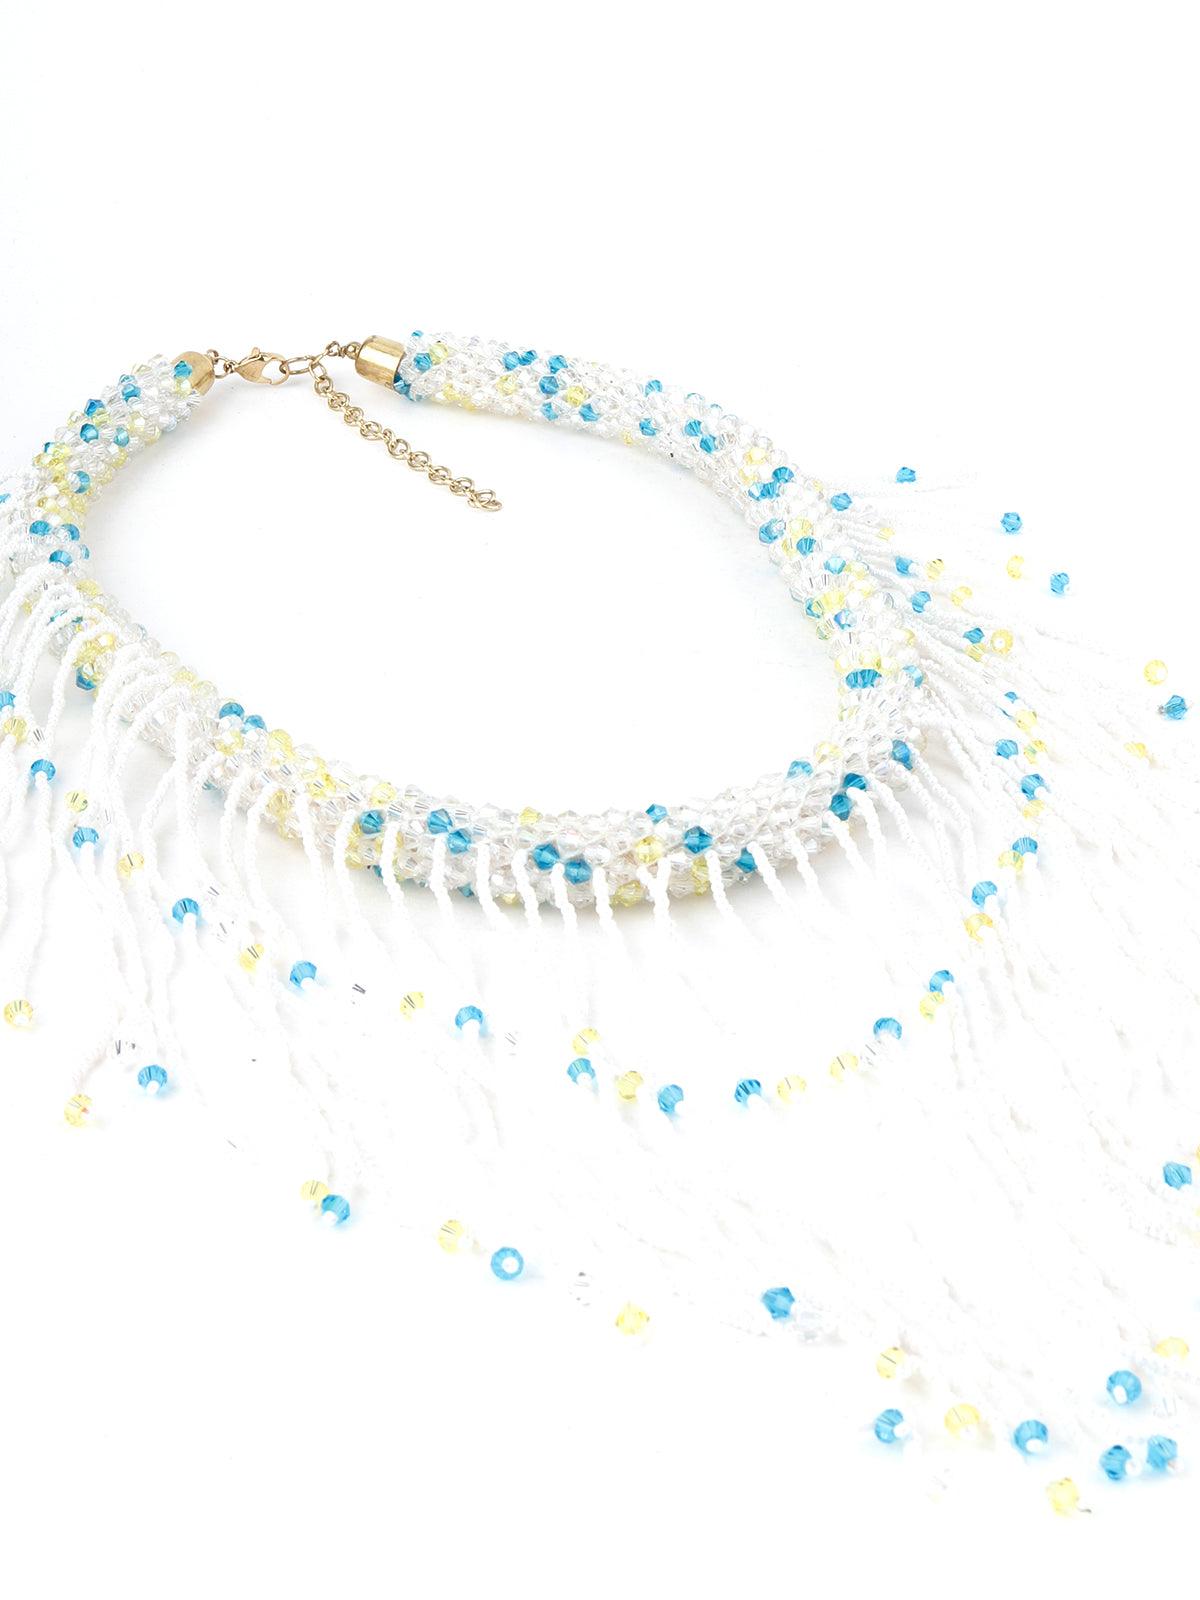 White, Blue and Green Crystal Necklace - Odette